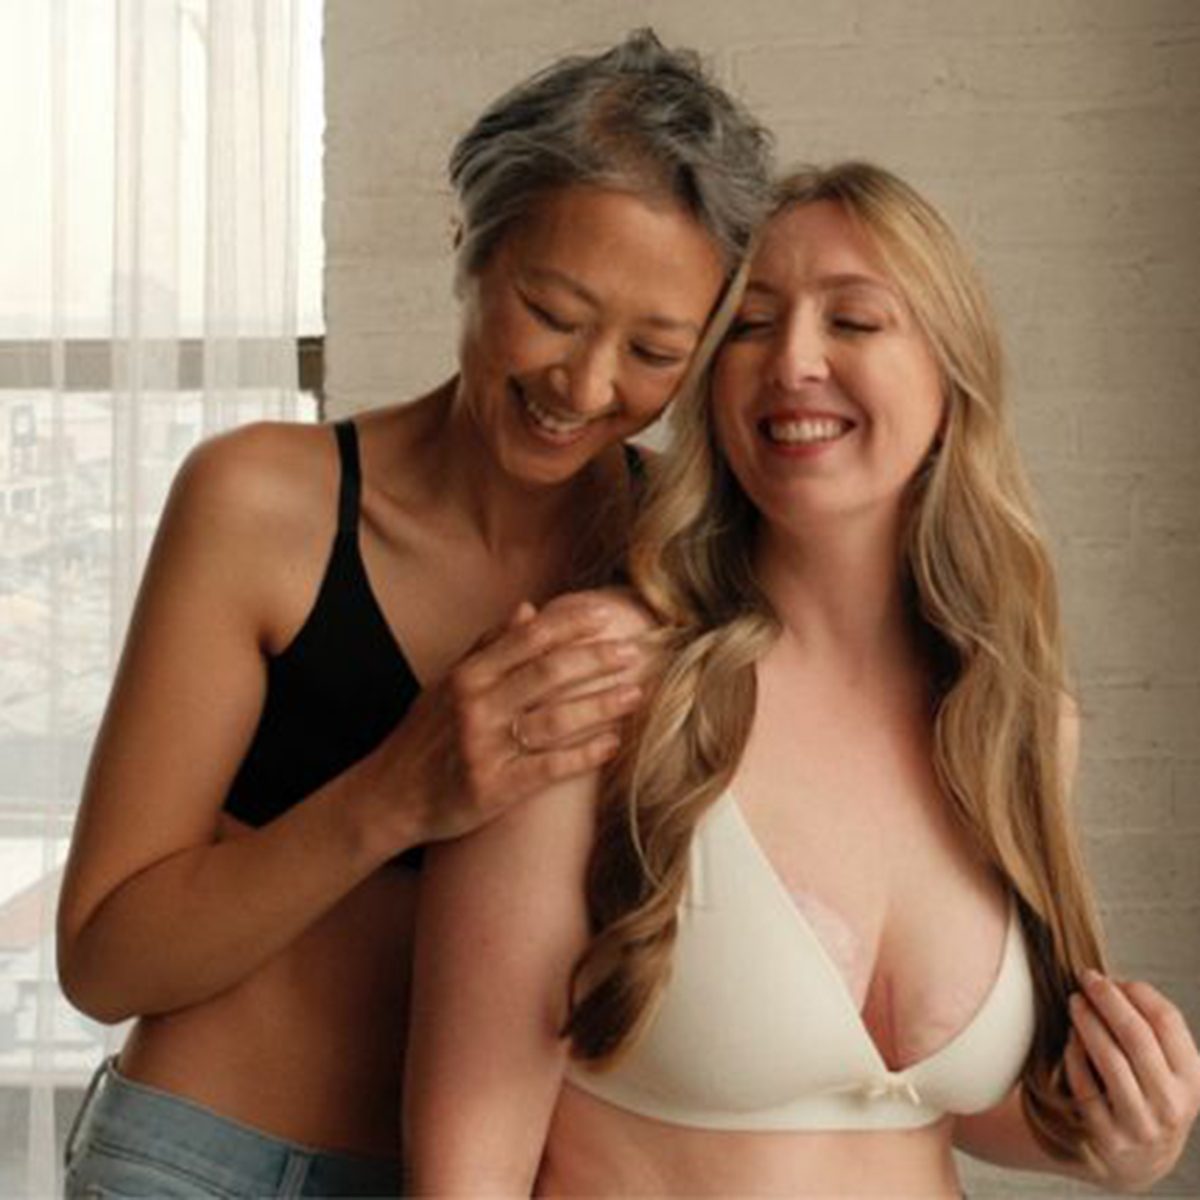 AnaOno Bras Offer Affordable and Chest-Inclusive Intimates for All